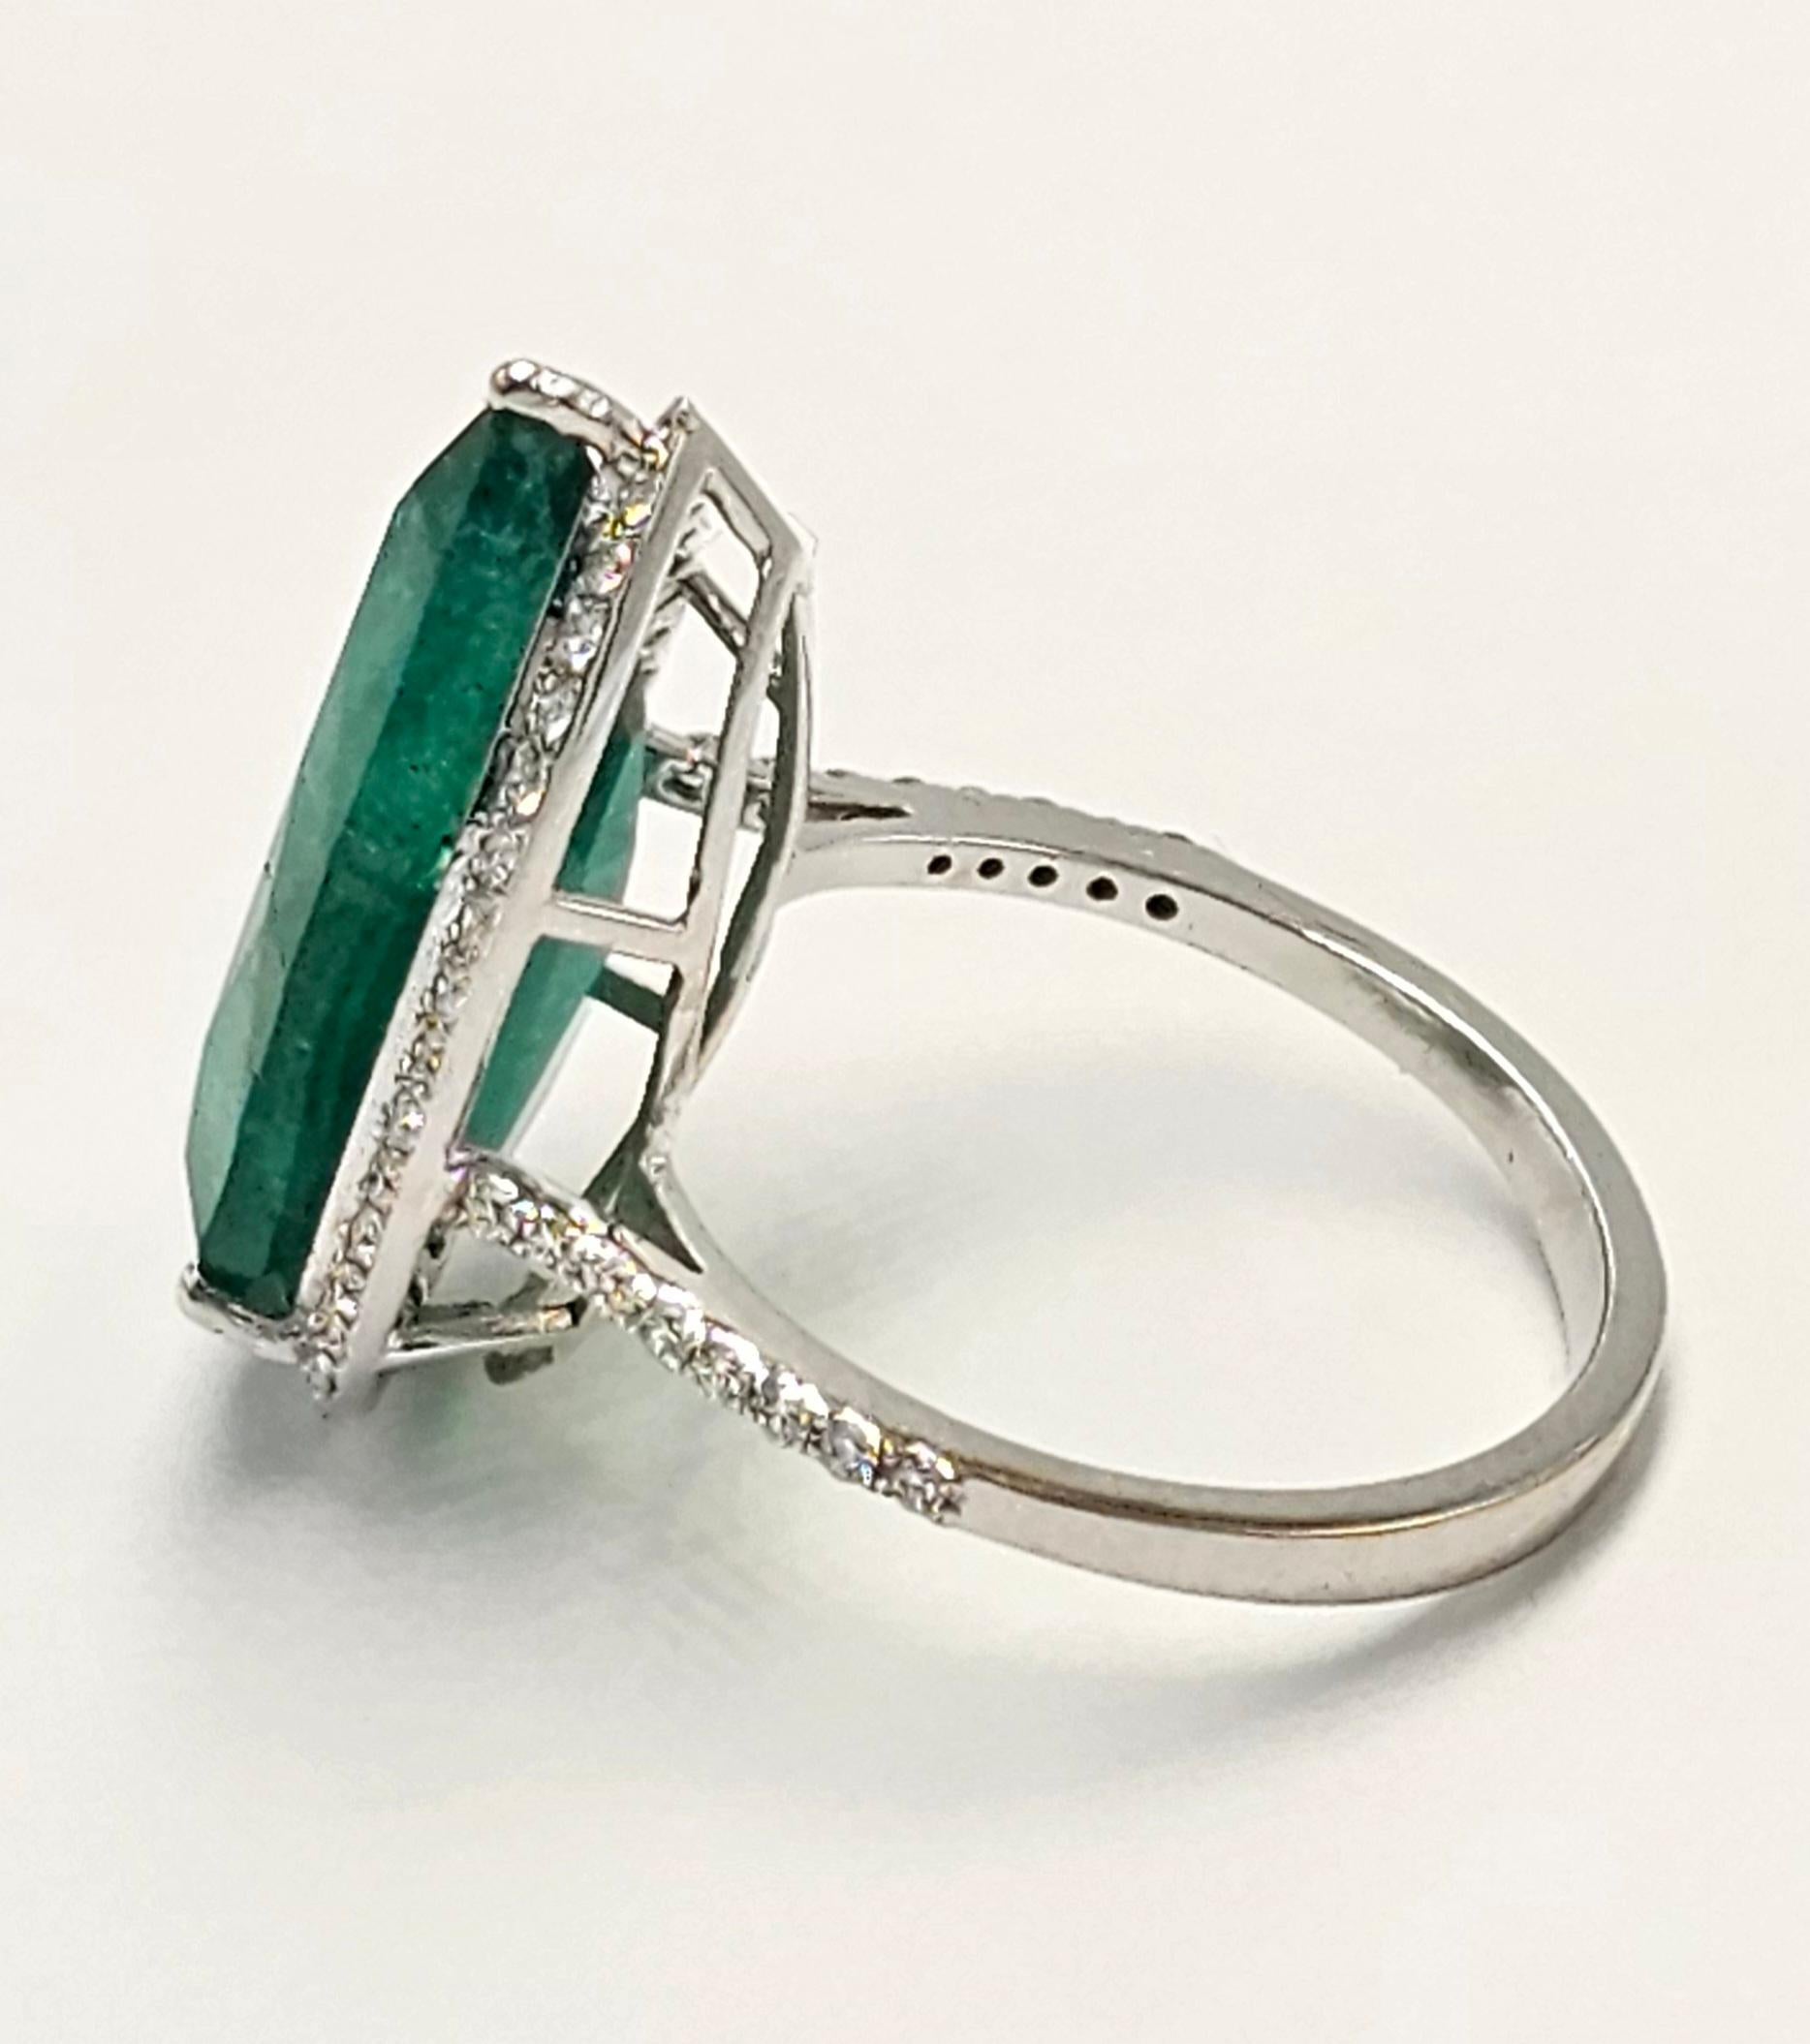 Set in a custom designed 18K white Gold ring, surrounded by beautiful and carefully curated diamonds this gorgeous pear shaped Emerald weighing 9.95 carats has a unique and rare combination of deep color, clarity and 5 plus carat size! The gemstone